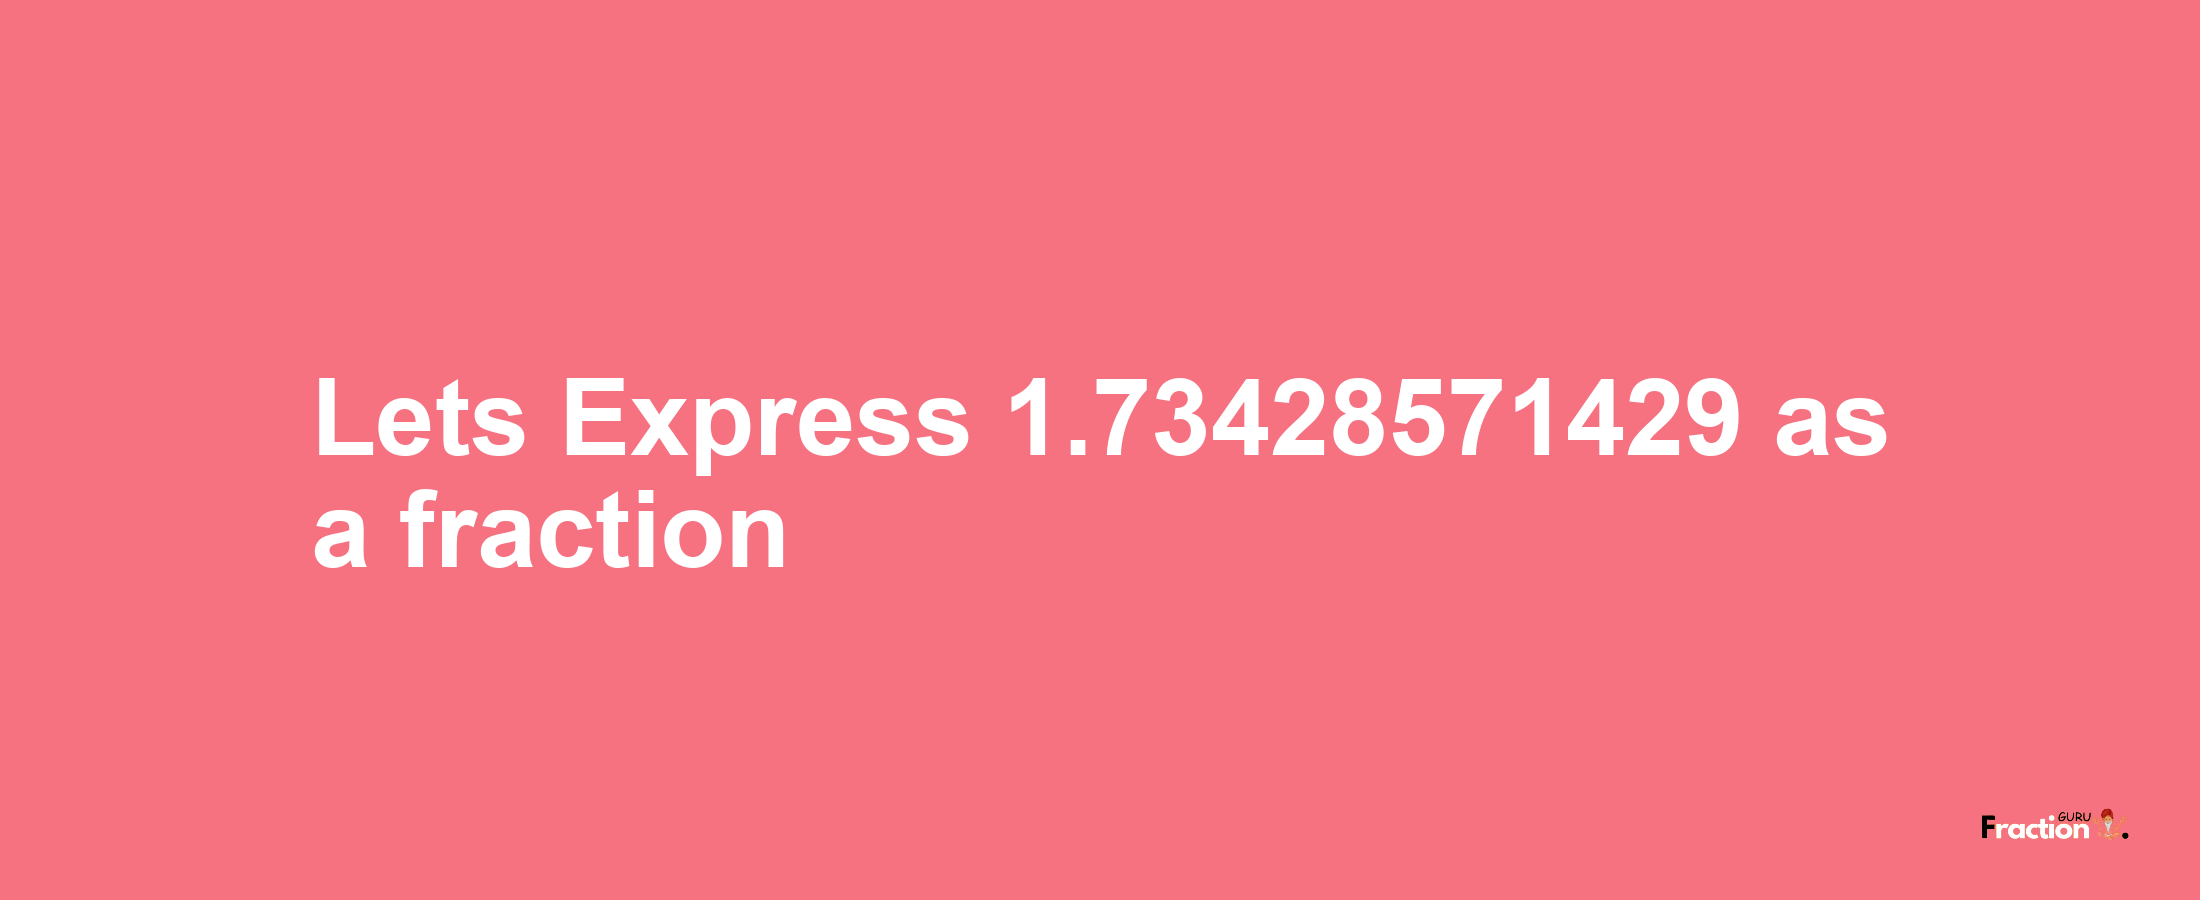 Lets Express 1.73428571429 as afraction